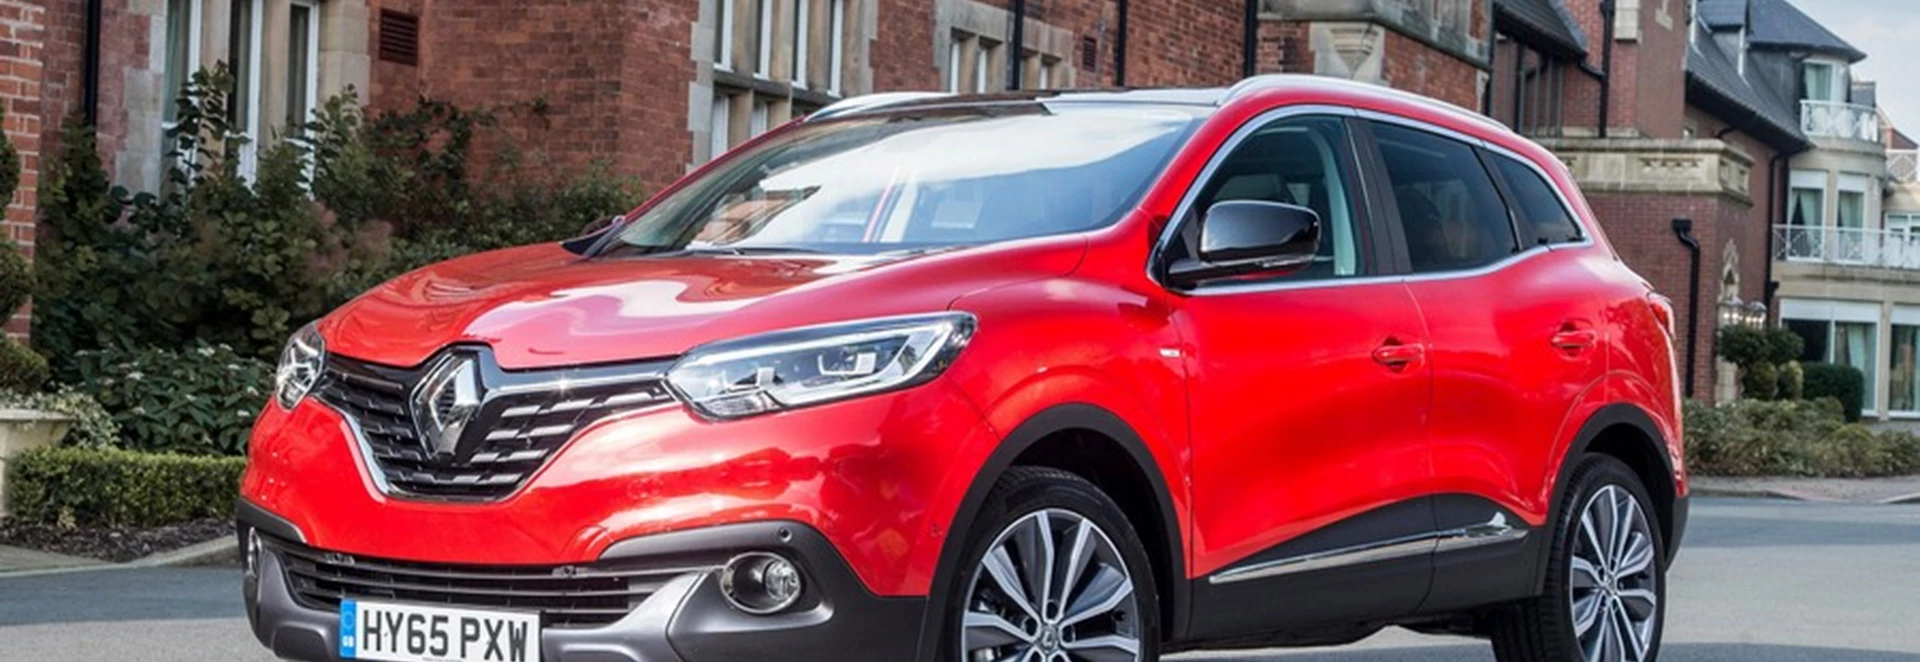 New range-topping trim and gearbox for Renault Kadjar